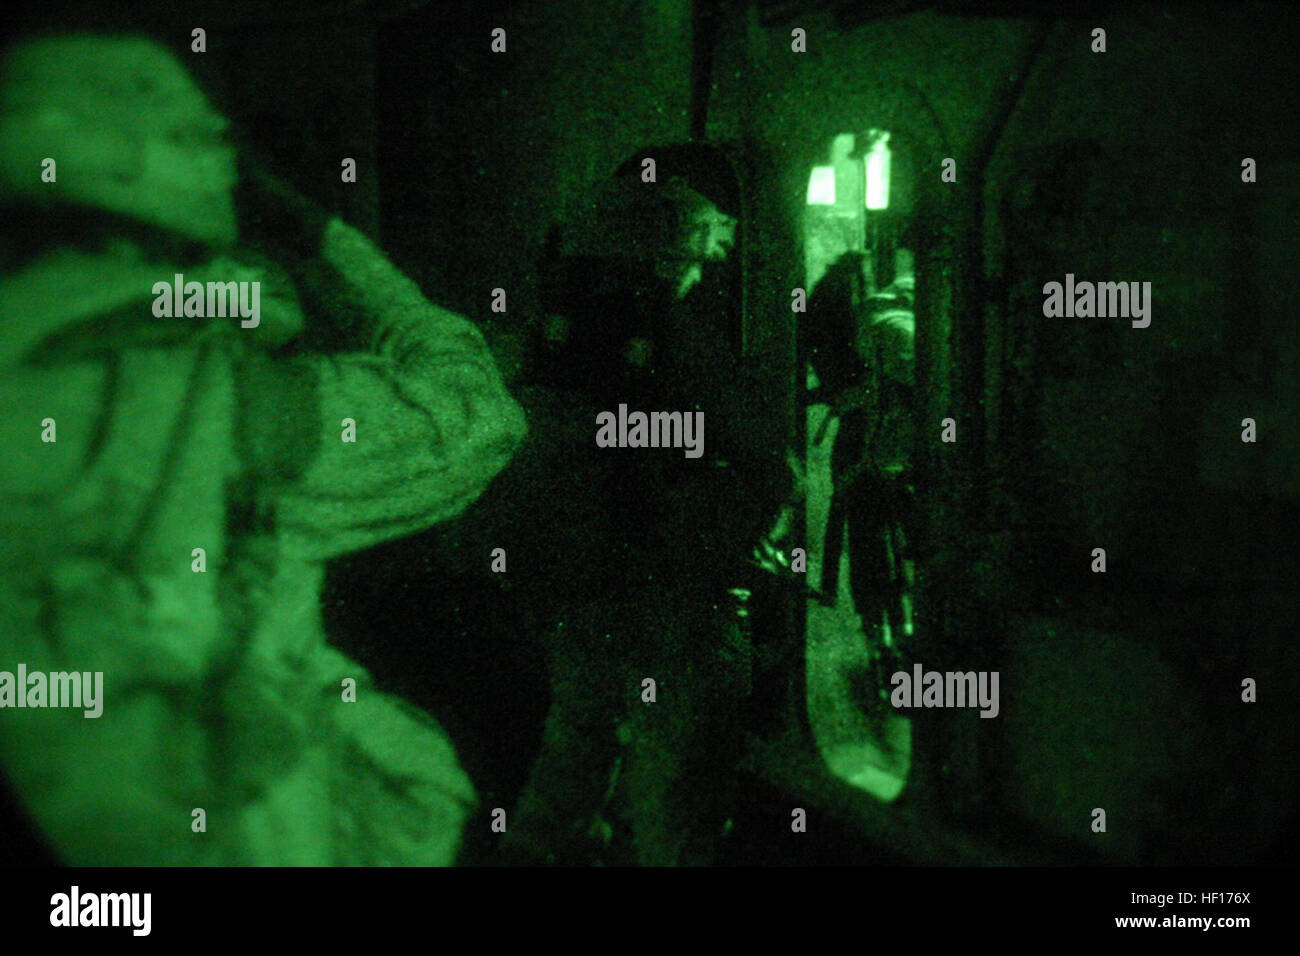 ABOARD USS BOXER (Aug. 12, 2006) -- Marines with Mortar's Platoon, Weapon's Co., Battalion Landing Team 2/4, walk through a hatch after completing a helicopter Tactical Recovery of Aircraft Personnel exercise . BLT 2/4 is participating for Joint Task Force Exercise in support of the 15th Marine Expeditionary Unit. JTFEX is the final evaluation for the MEU, in which their capabilities as a Marine Air Ground Task Force are tested. (Official USMC photo by Cpl. Thomas J. Grove) (Released) USMC-060812-M-5578G-053 Stock Photo